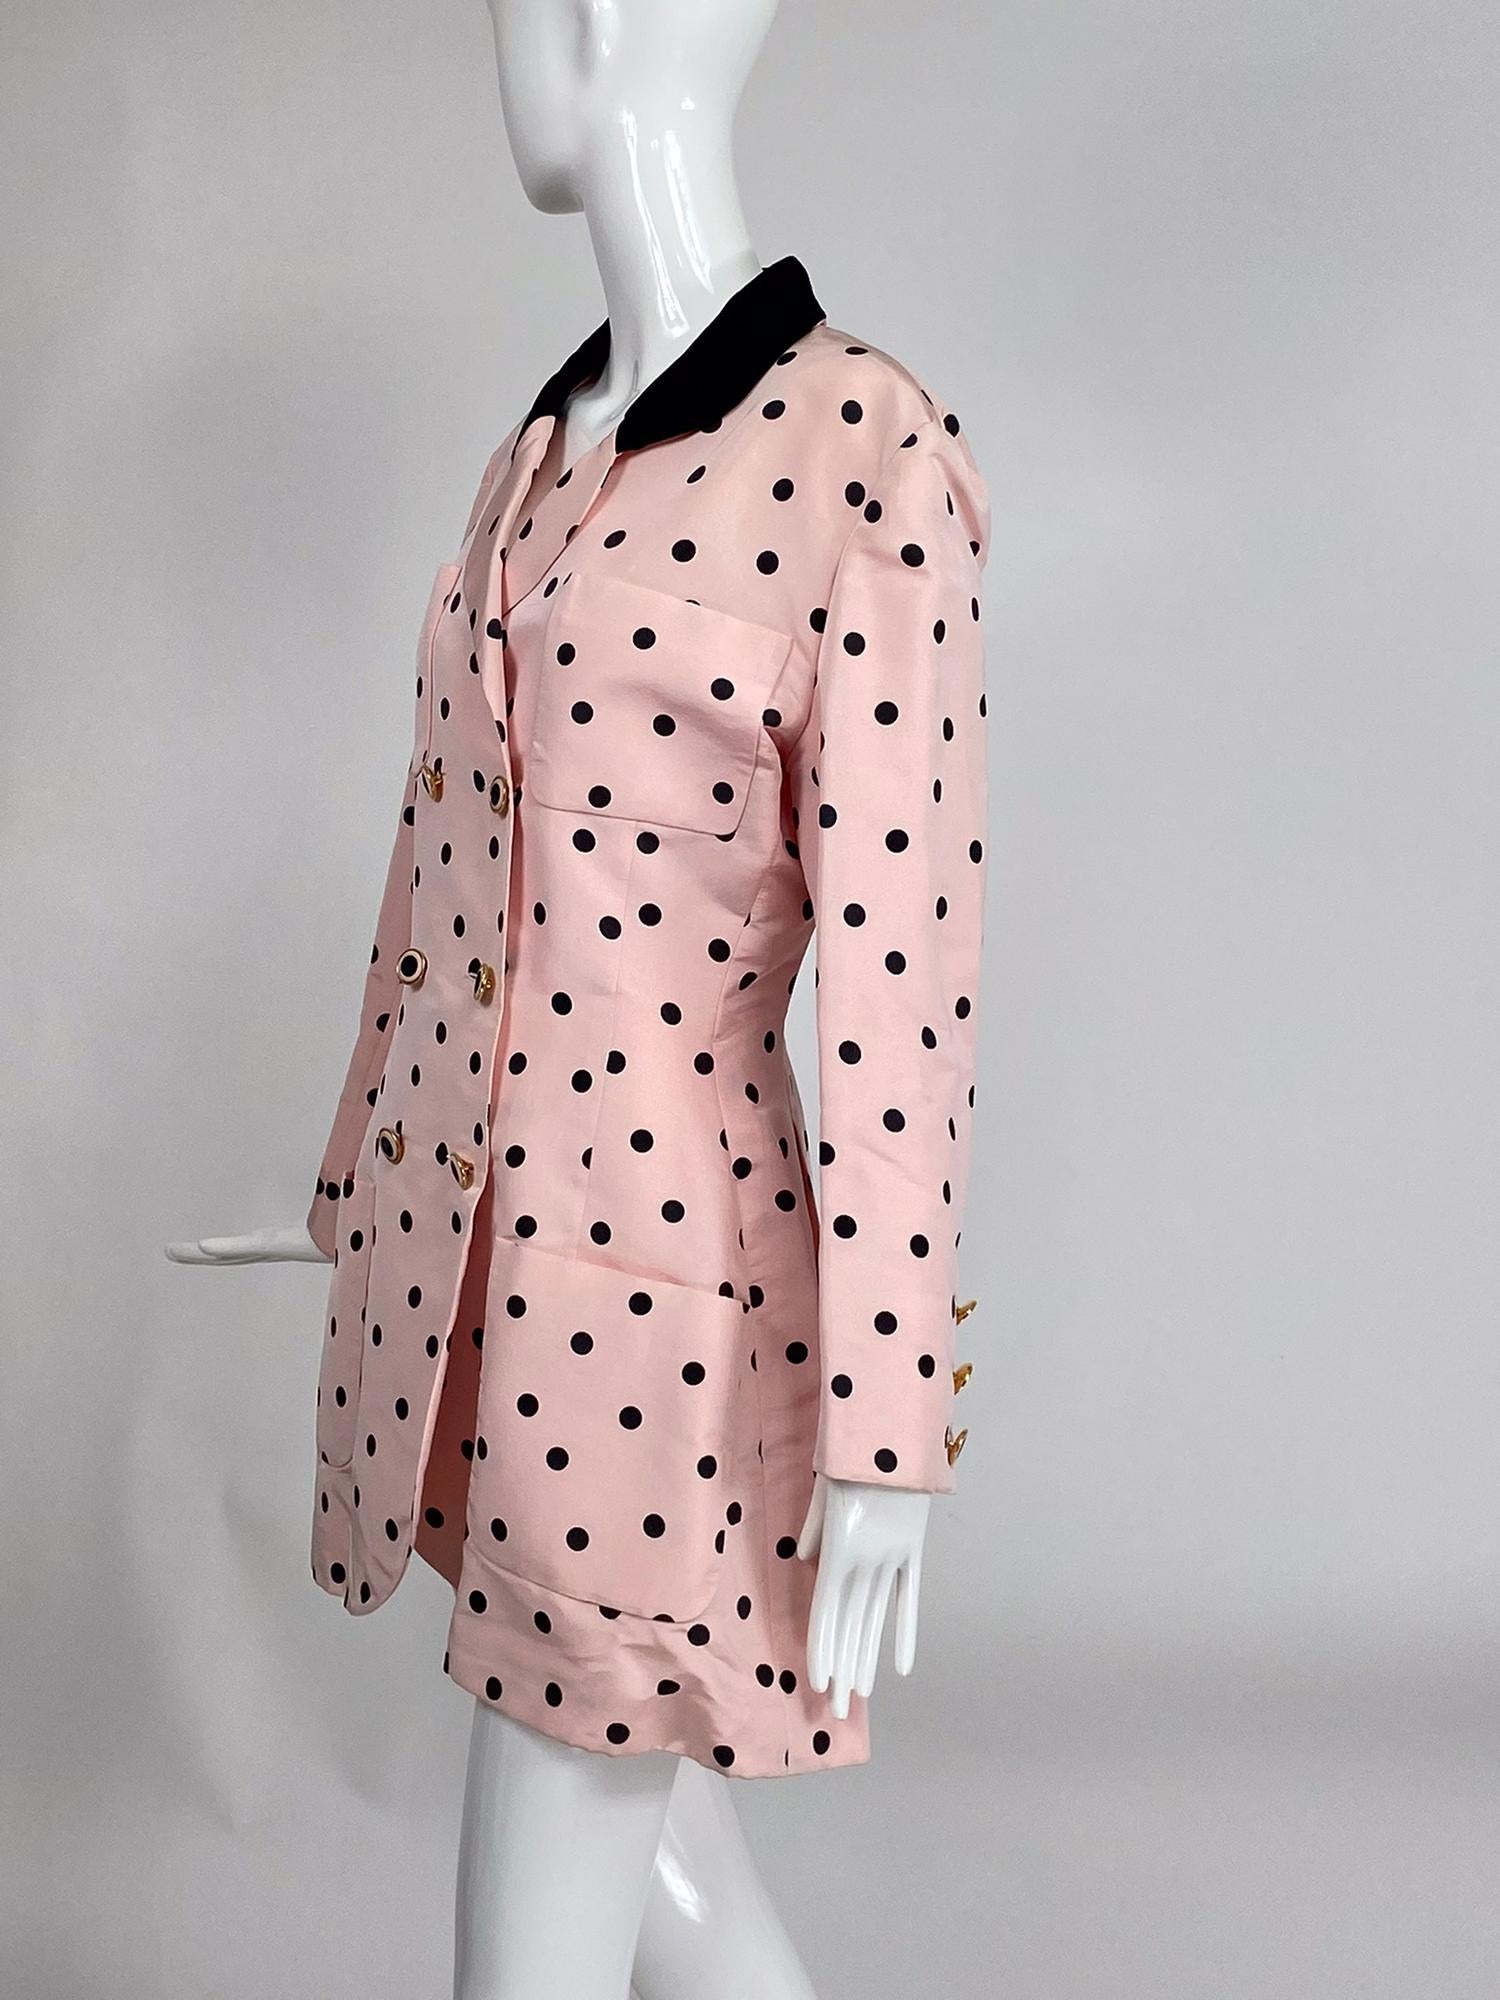 Chanel Fitted Silk Faille Pink & Black Dot Jacket 1990s 1